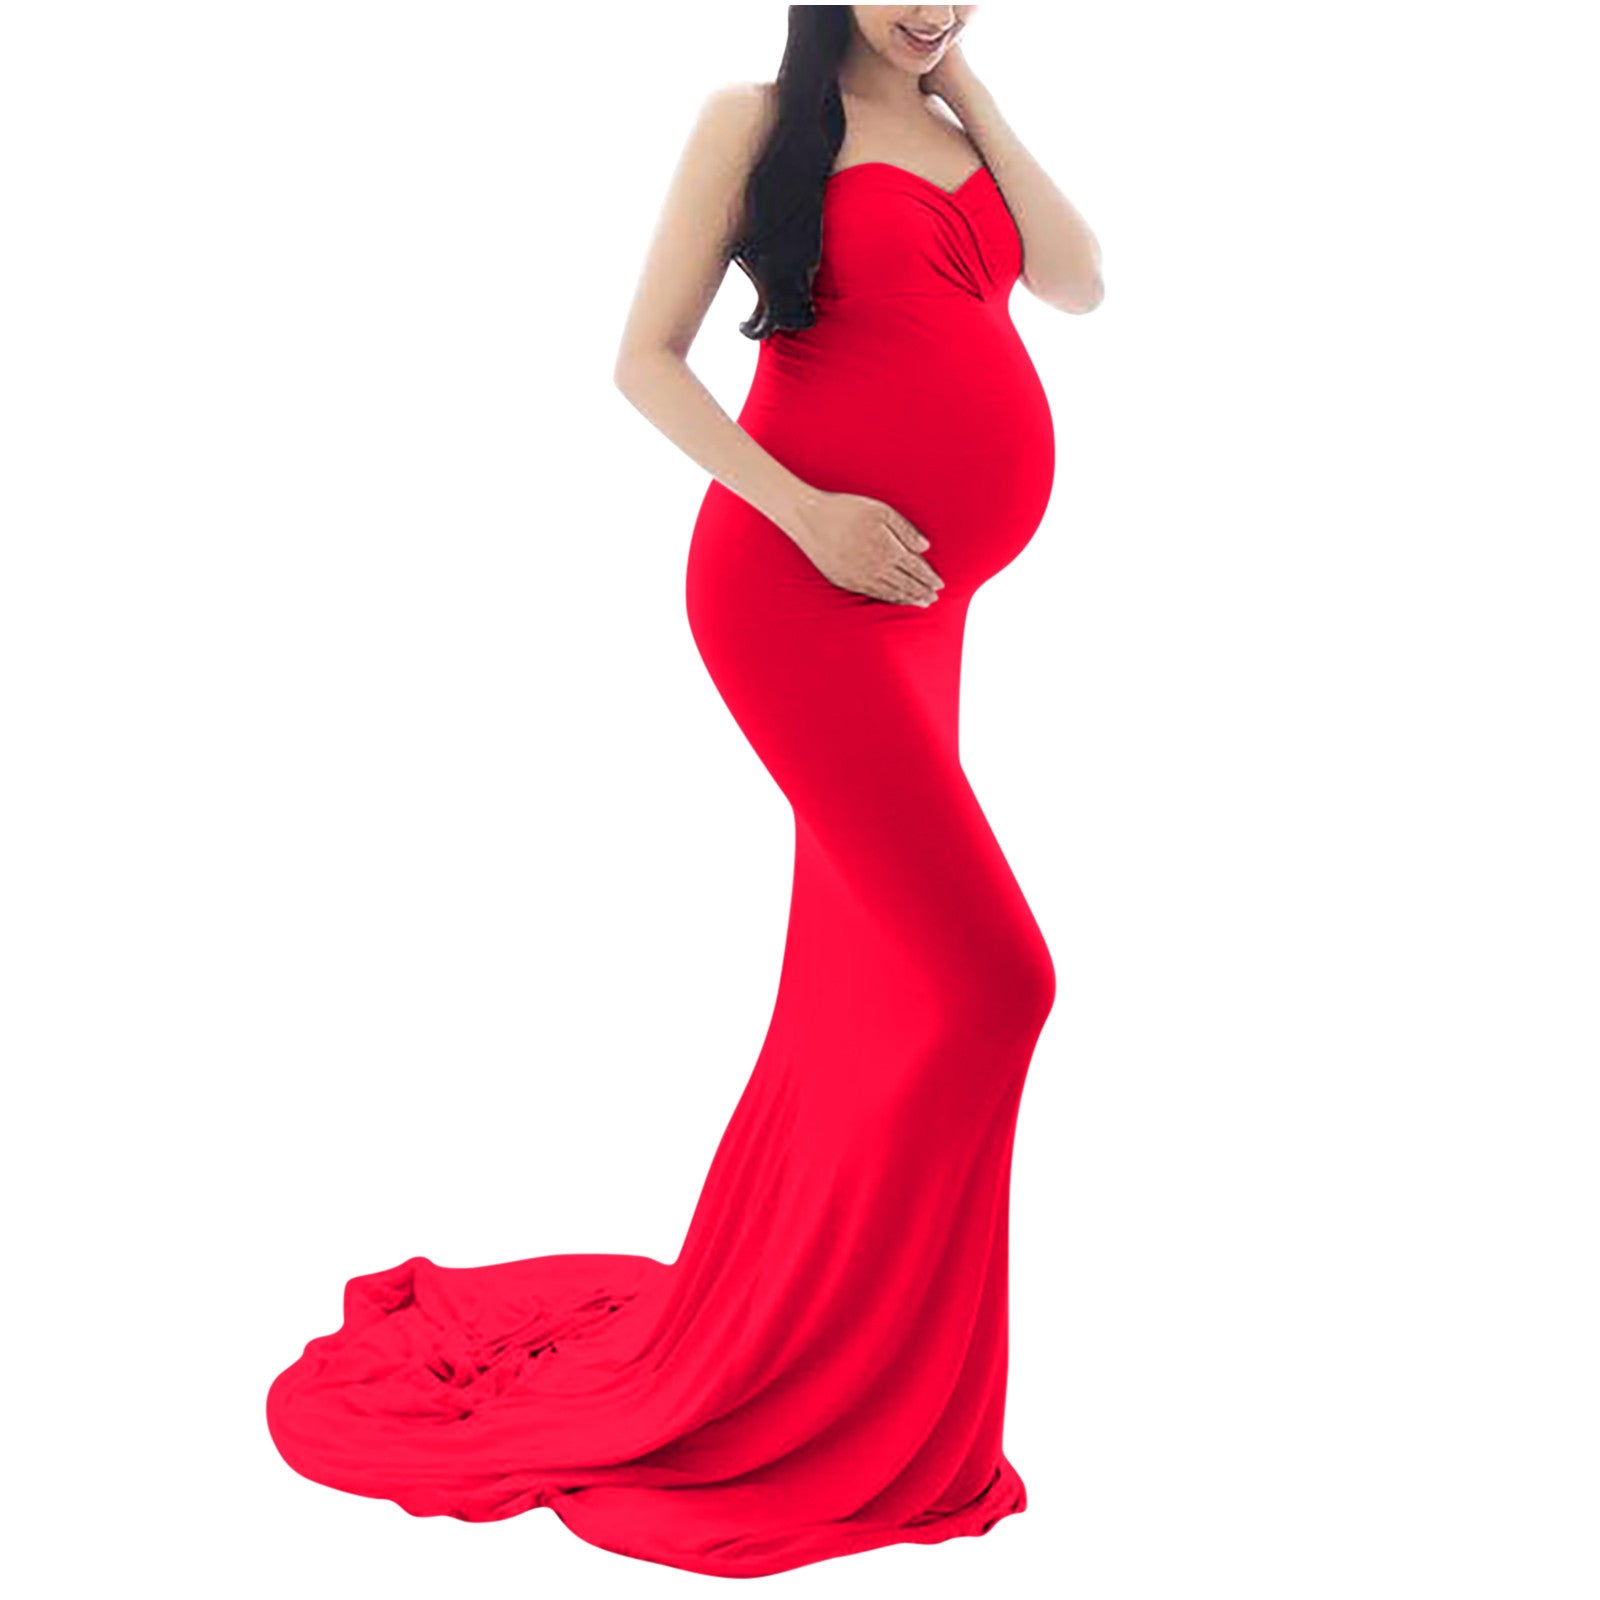 New 2023 Women Pregnant Dress Sexy Sleeveless Strapless Dress For Photography P